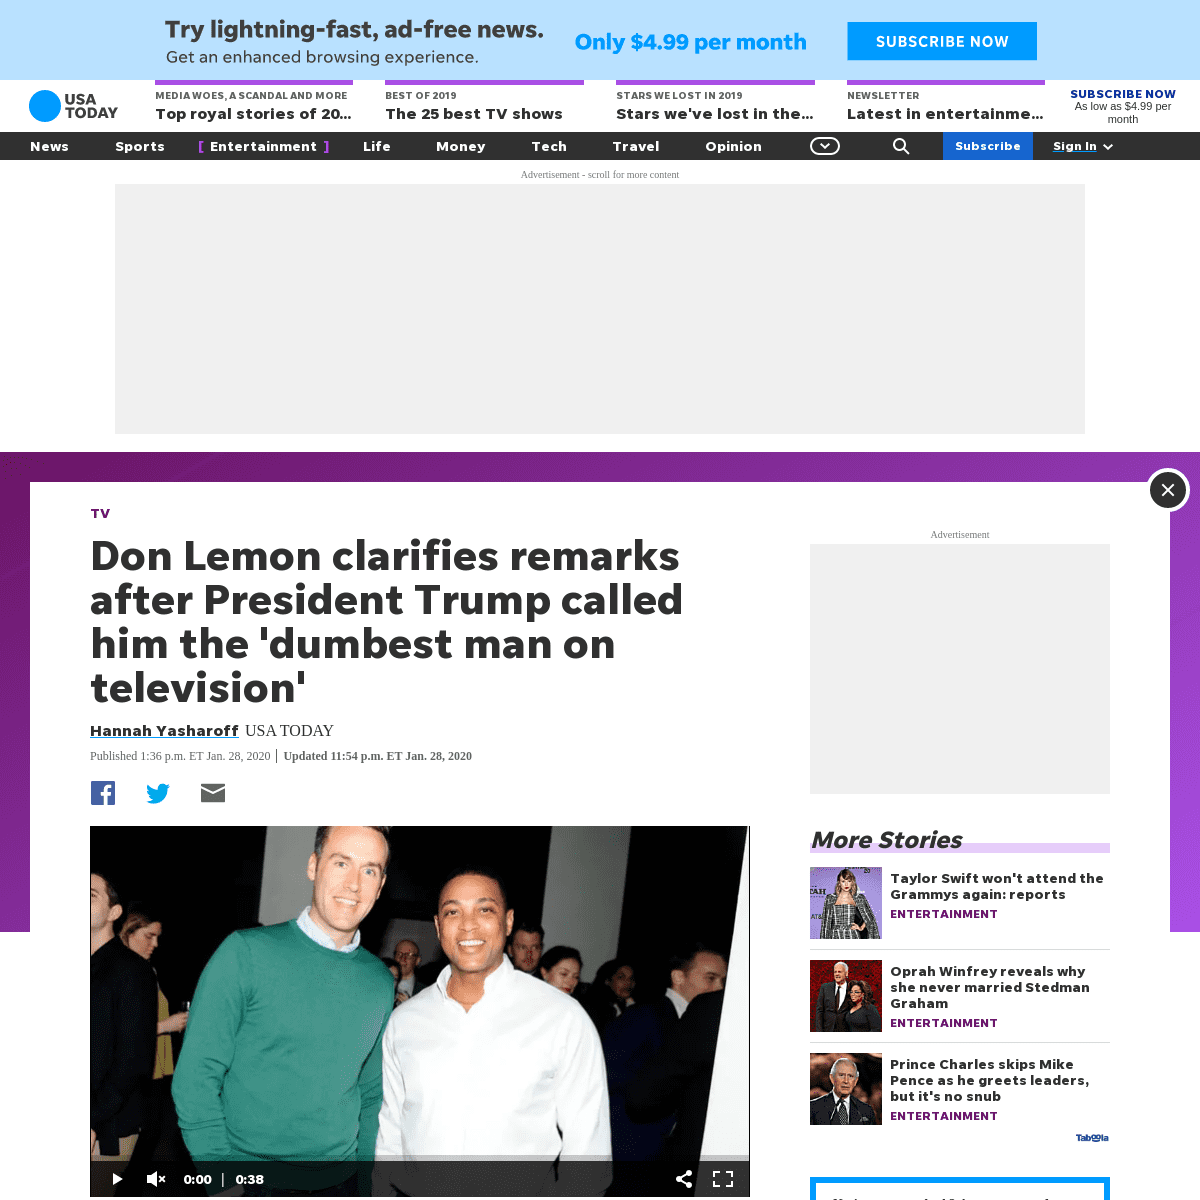 A complete backup of www.usatoday.com/story/entertainment/tv/2020/01/28/trump-tweets-cnn-don-lemon-laughing-joke-his-fans/459785